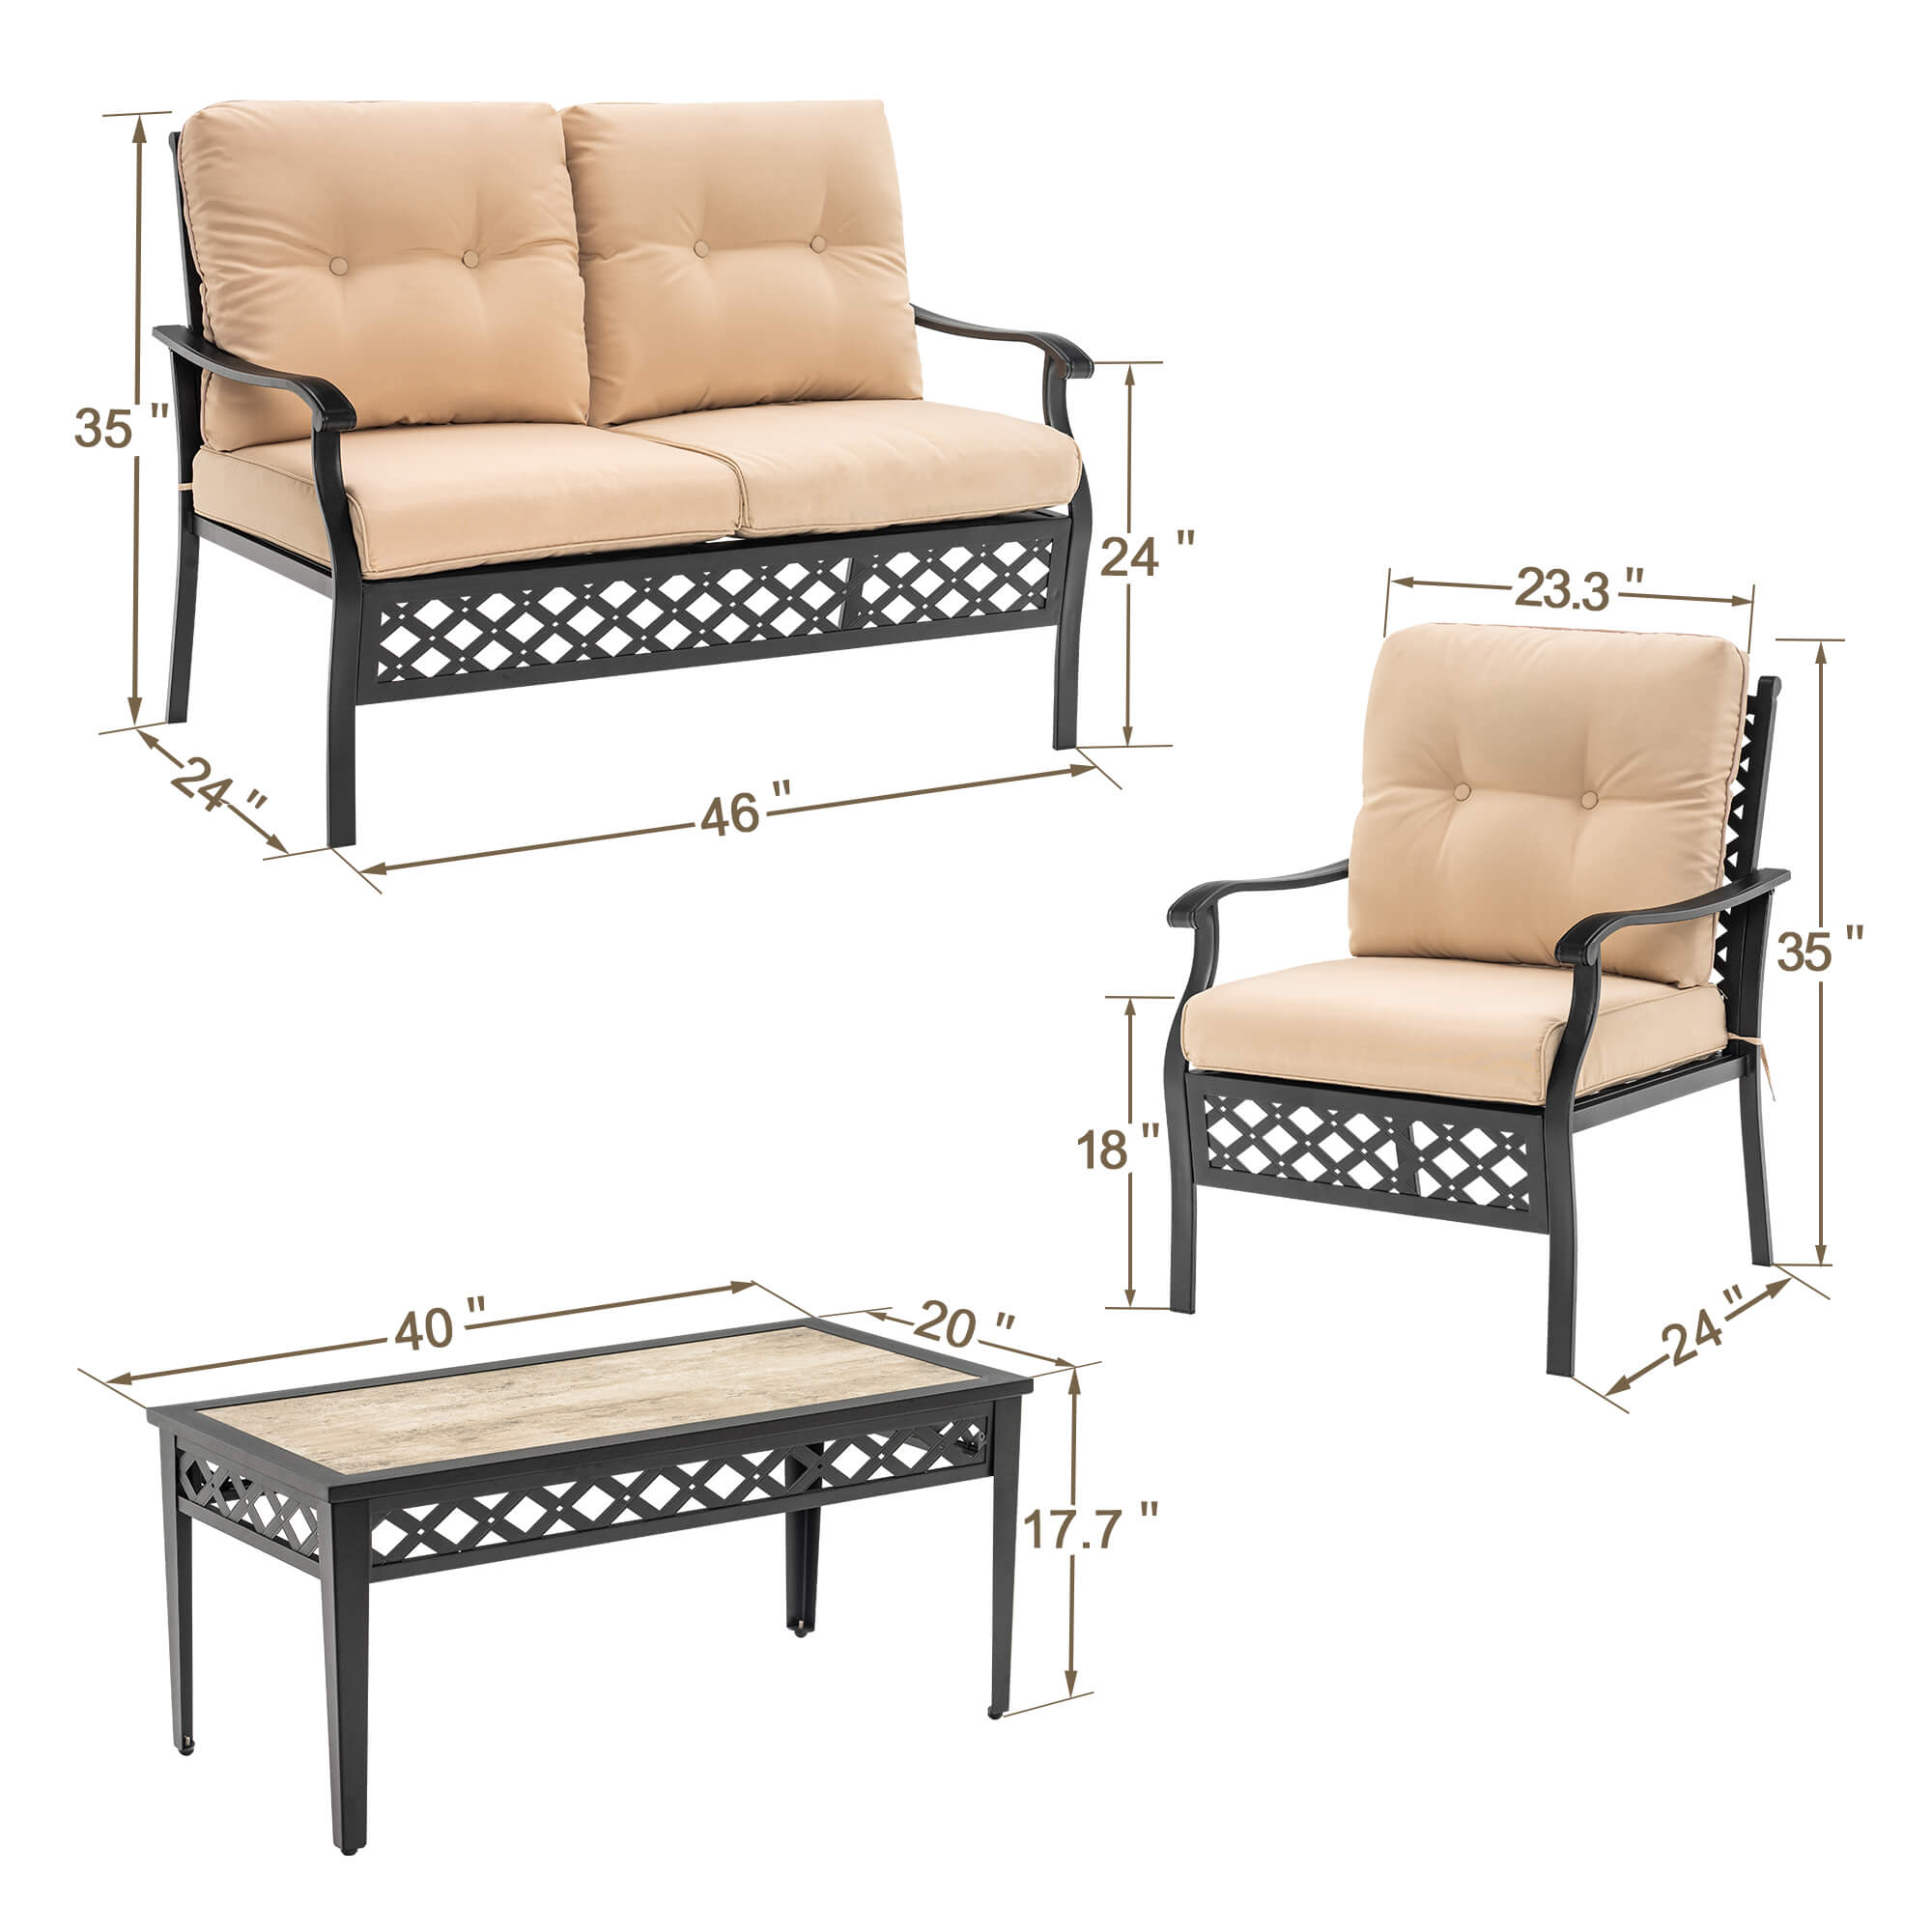 Ivinta 4 Pieces Patio Furniture Set Outdoor Sets for Home, Garden, Patio, Lawn, Poolside